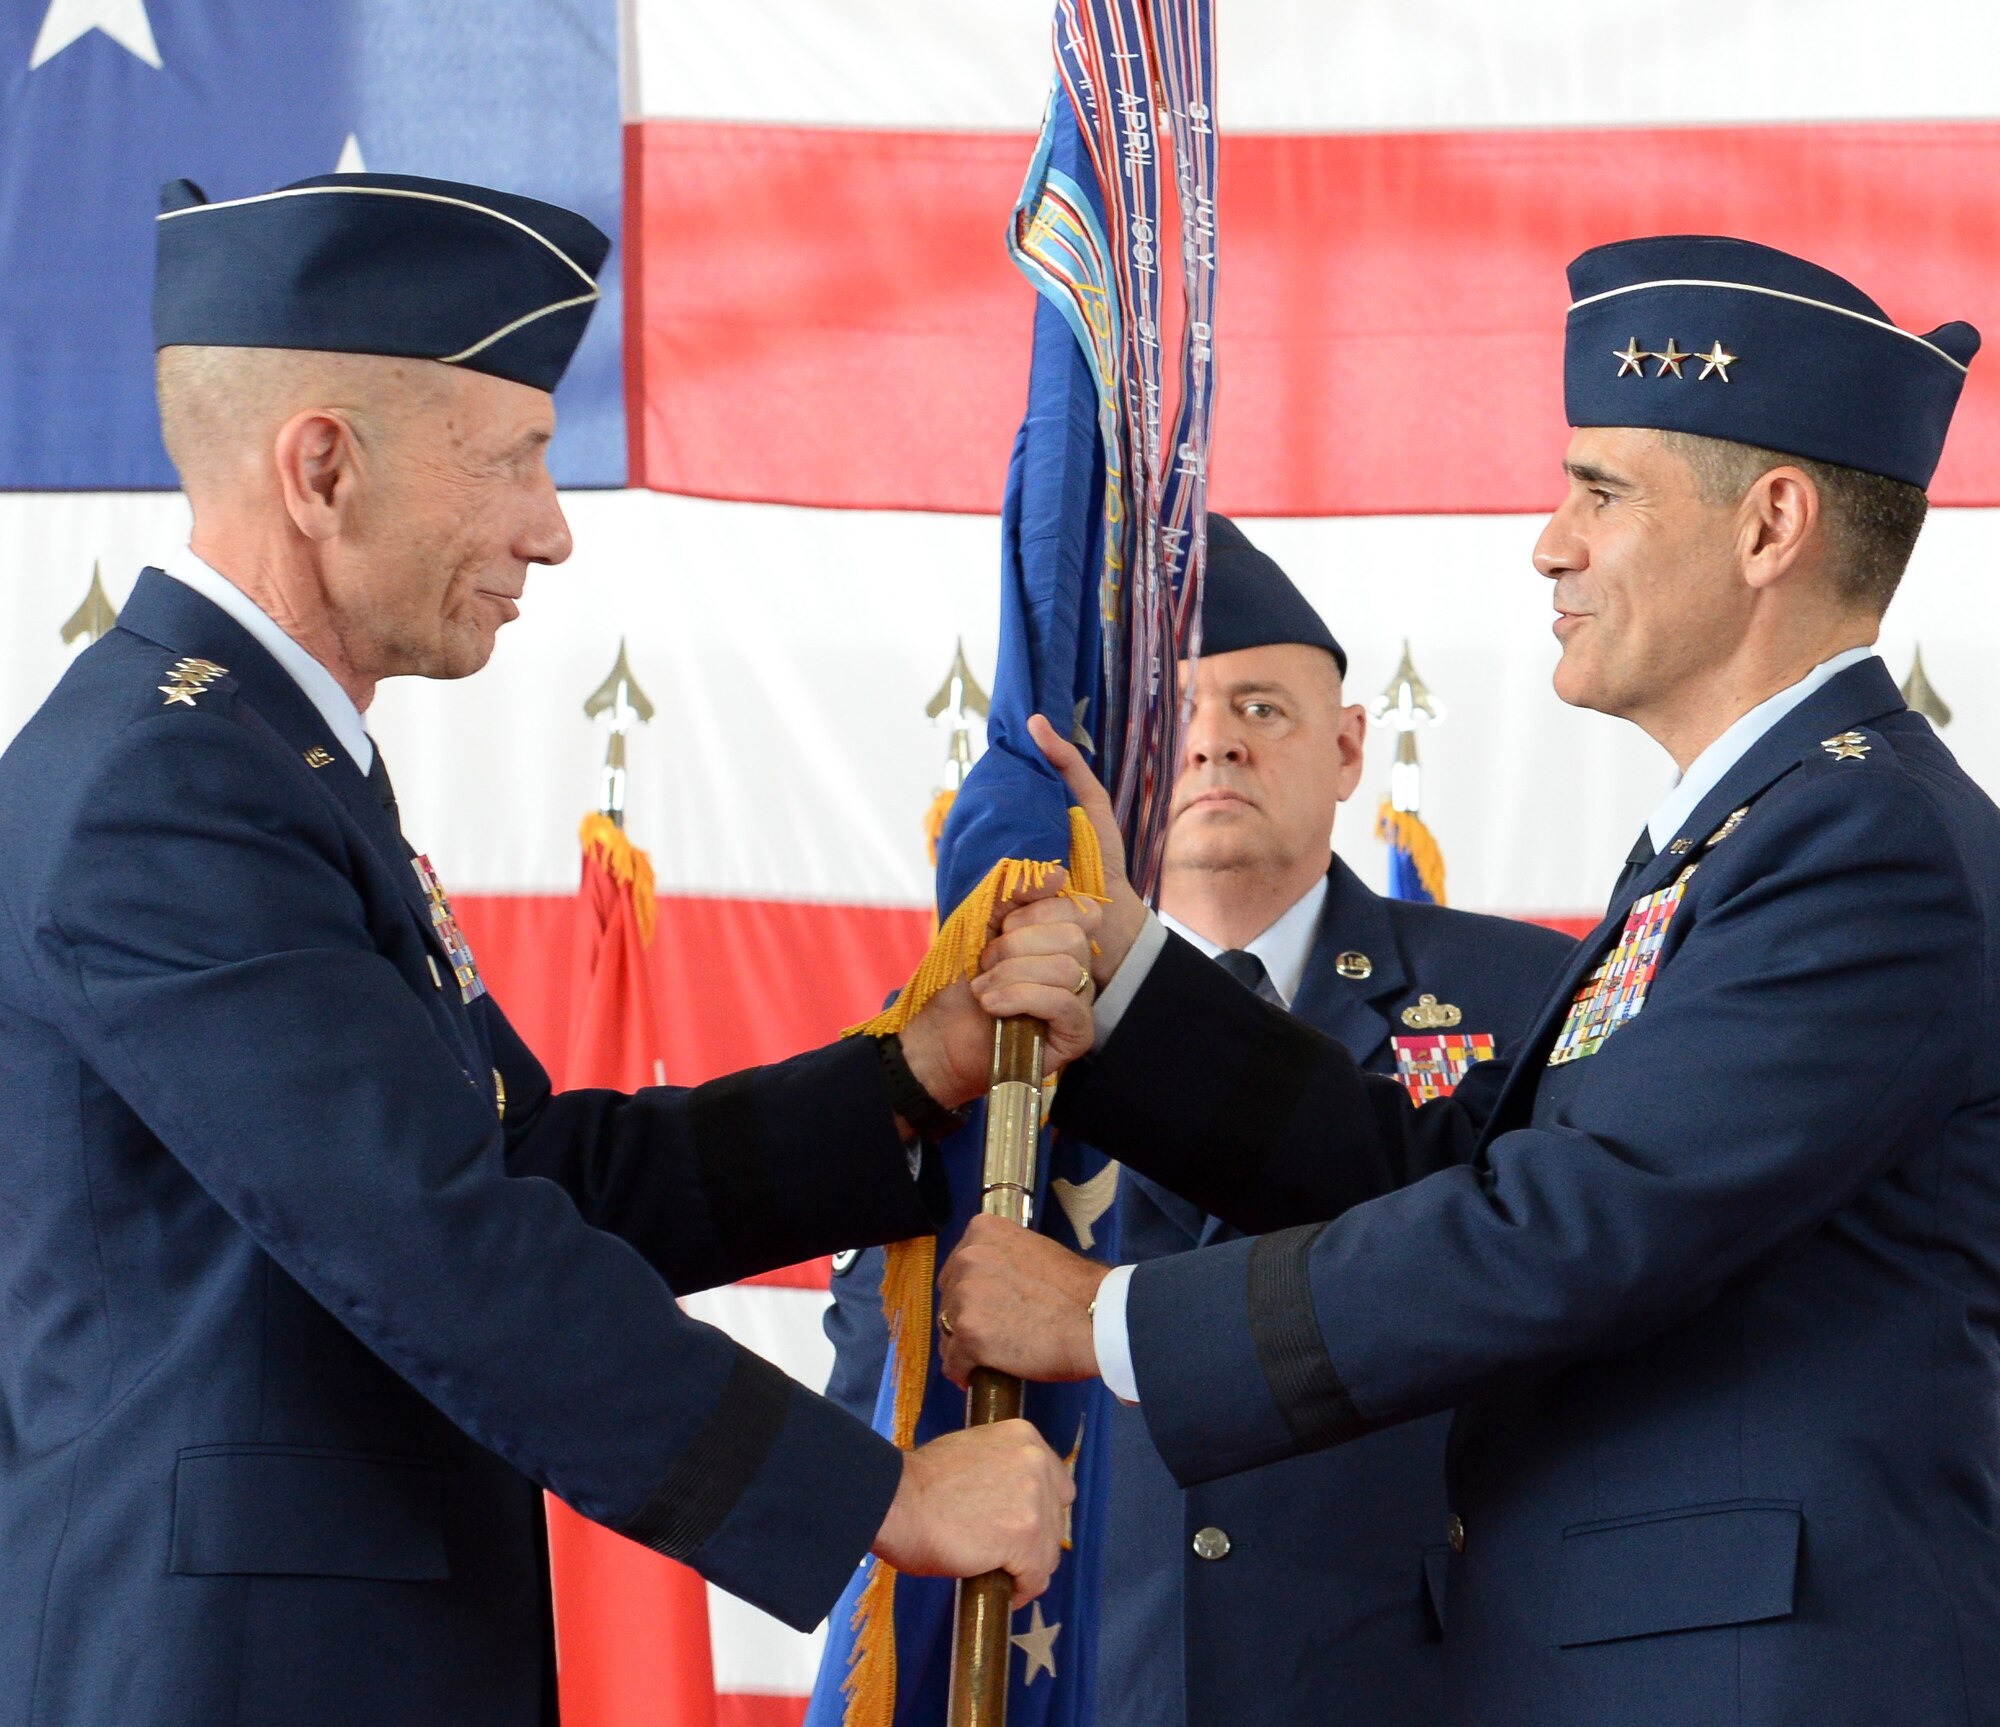 U.S. Air Force Lt. Gen. Marc Sasseville, commander, 1 AF (Air Forces Northern) and Continental U.S. North American Aerospace Defense Command Region (CONR) accepts the 1 AF guidon from General James Holmes, commander, Air Combat Command, during a change of command ceremony June 20, 2019, Tyndall AFB, Fla.  Holmes, along with General Terrance O’Shaughnessy, commander, United States Northern Command and North American Aerospace Defense Command officiated the 1 AF, CONR (AFNORTH) Change of Command. (U.S. Air National Guard Photo by Master Sgt. Regina Young)